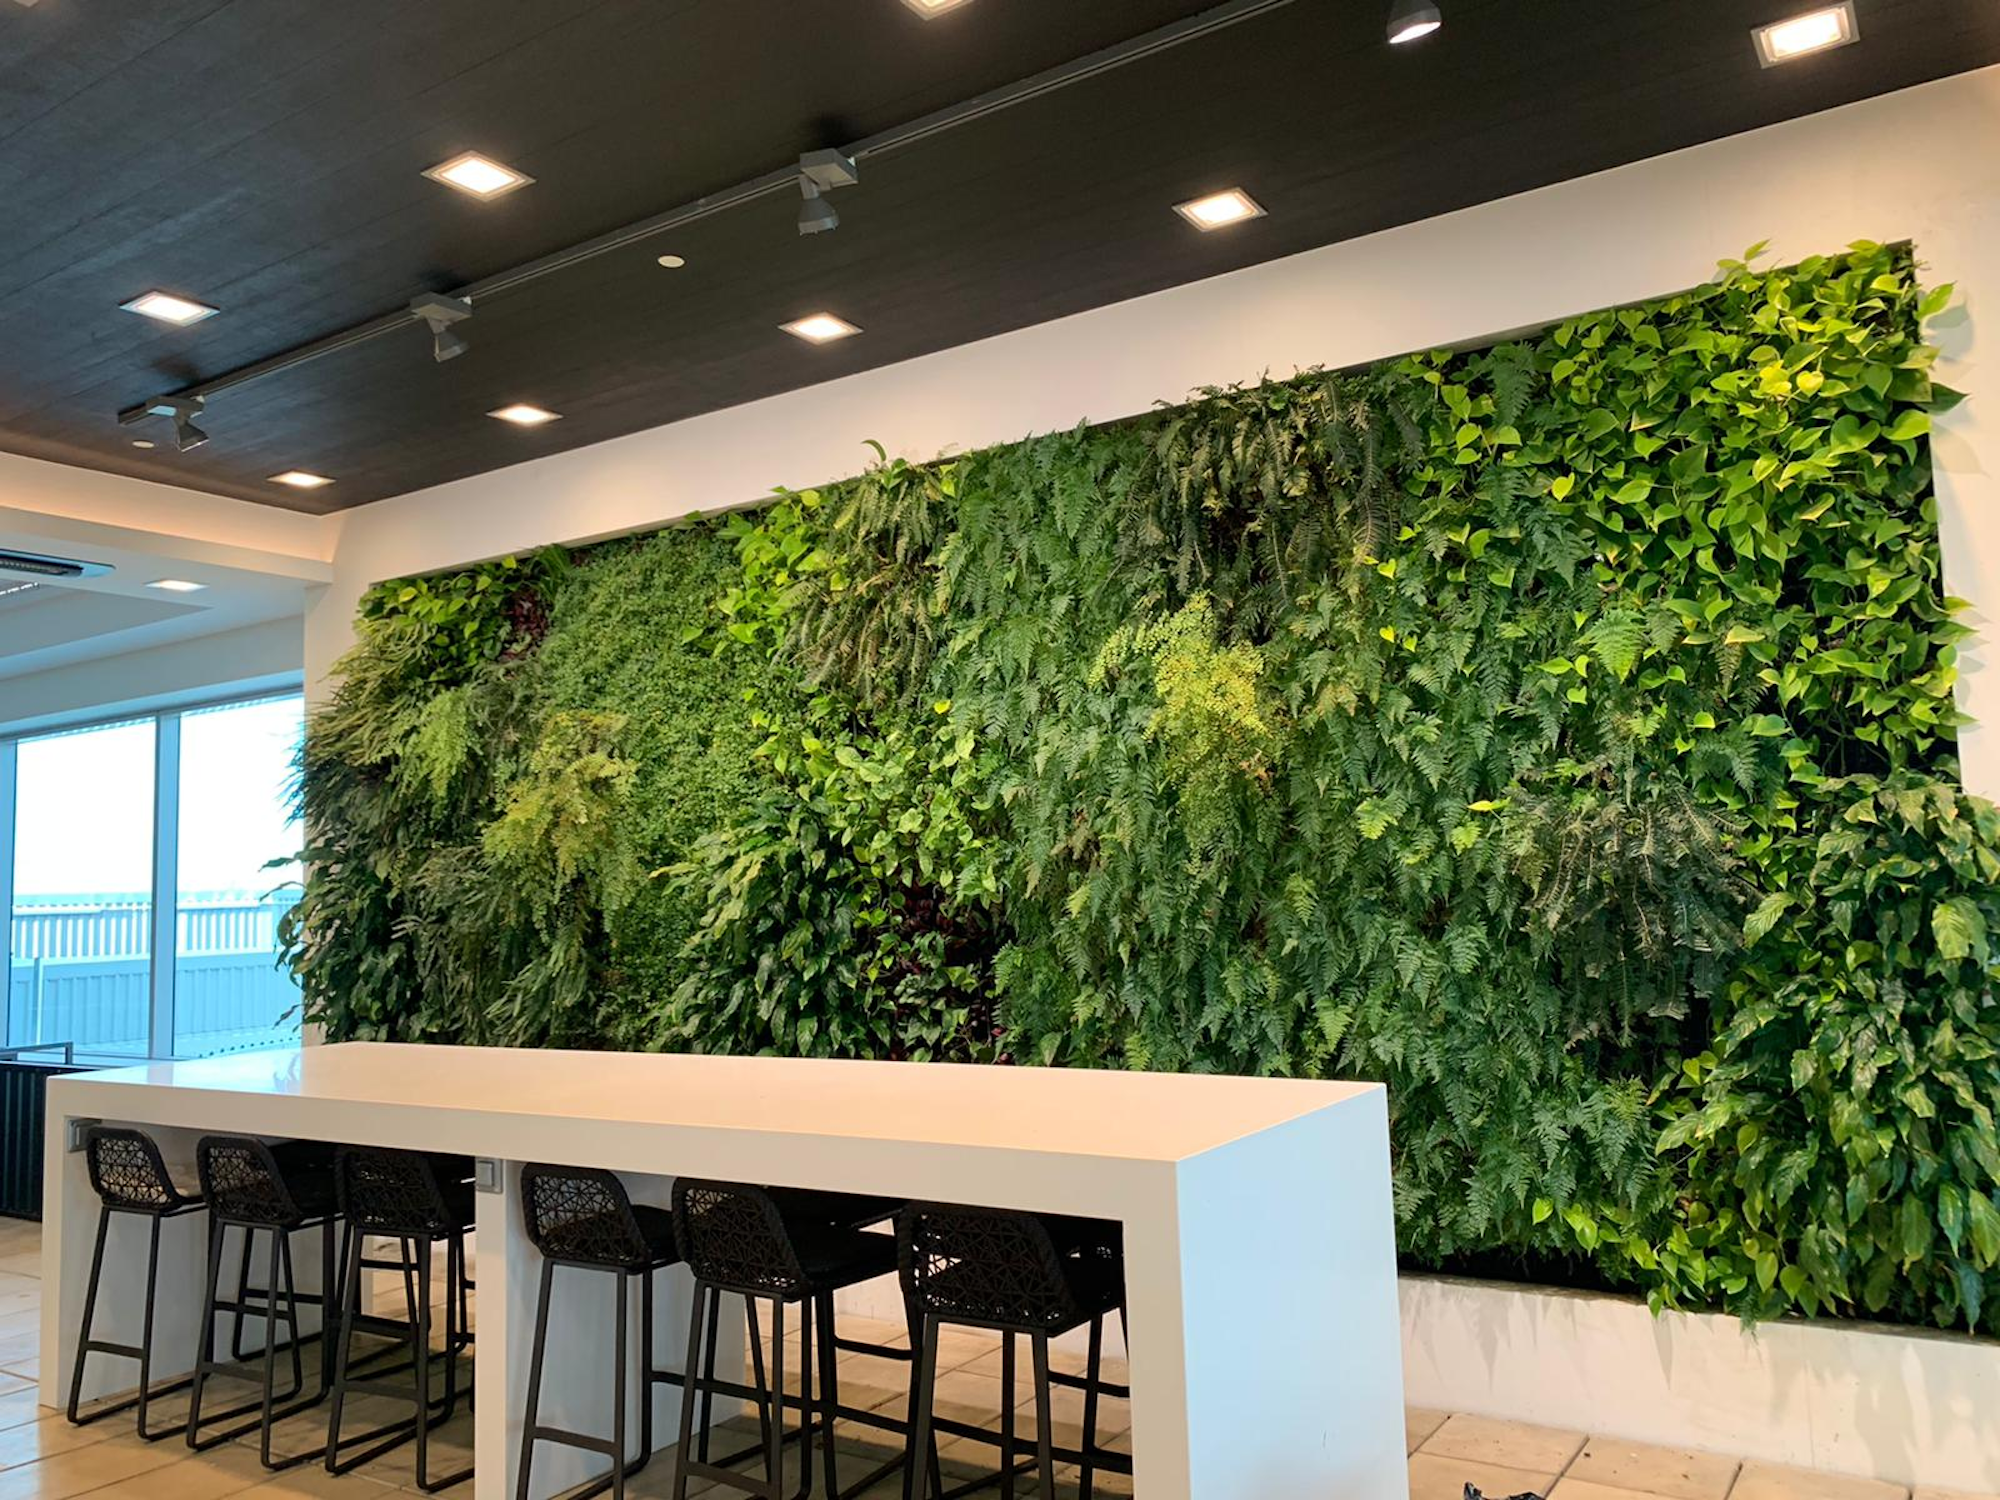 lush internal living green wall in an airport lounge in front of bar table and chairs